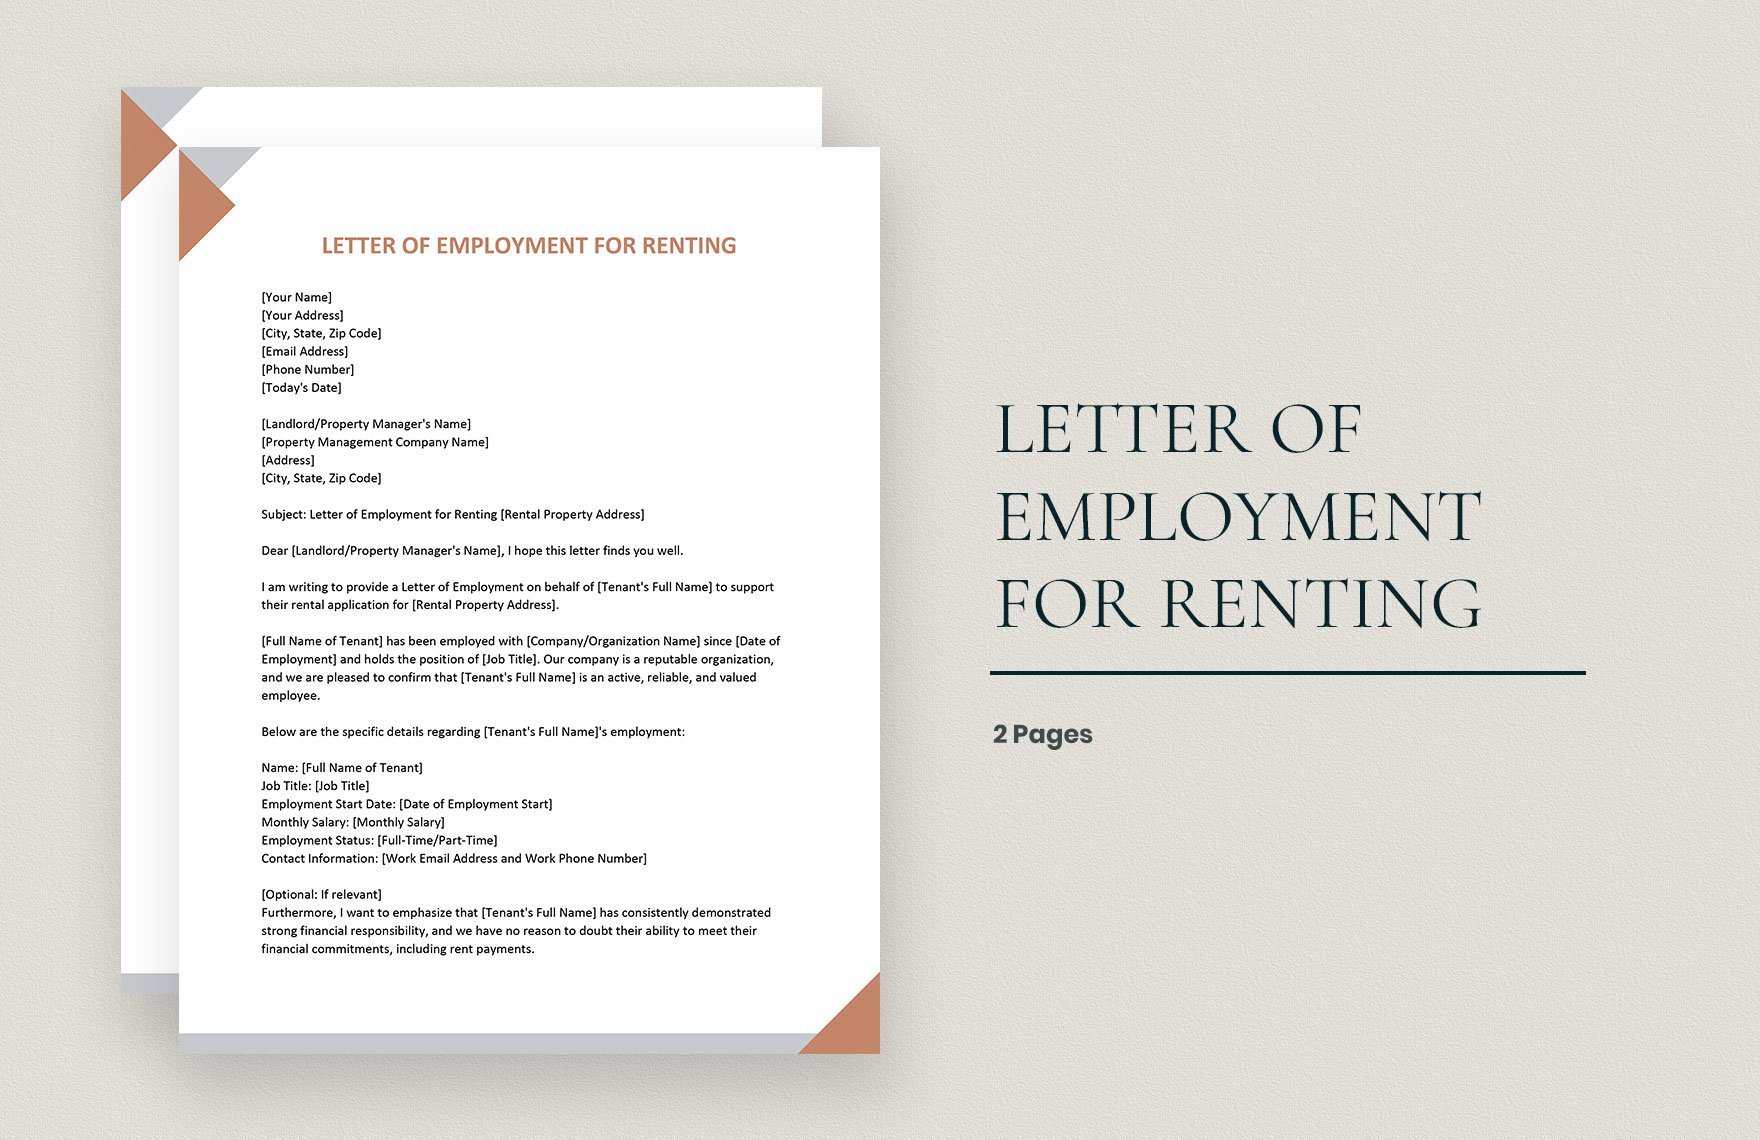 Free Letter of Employment for Renting